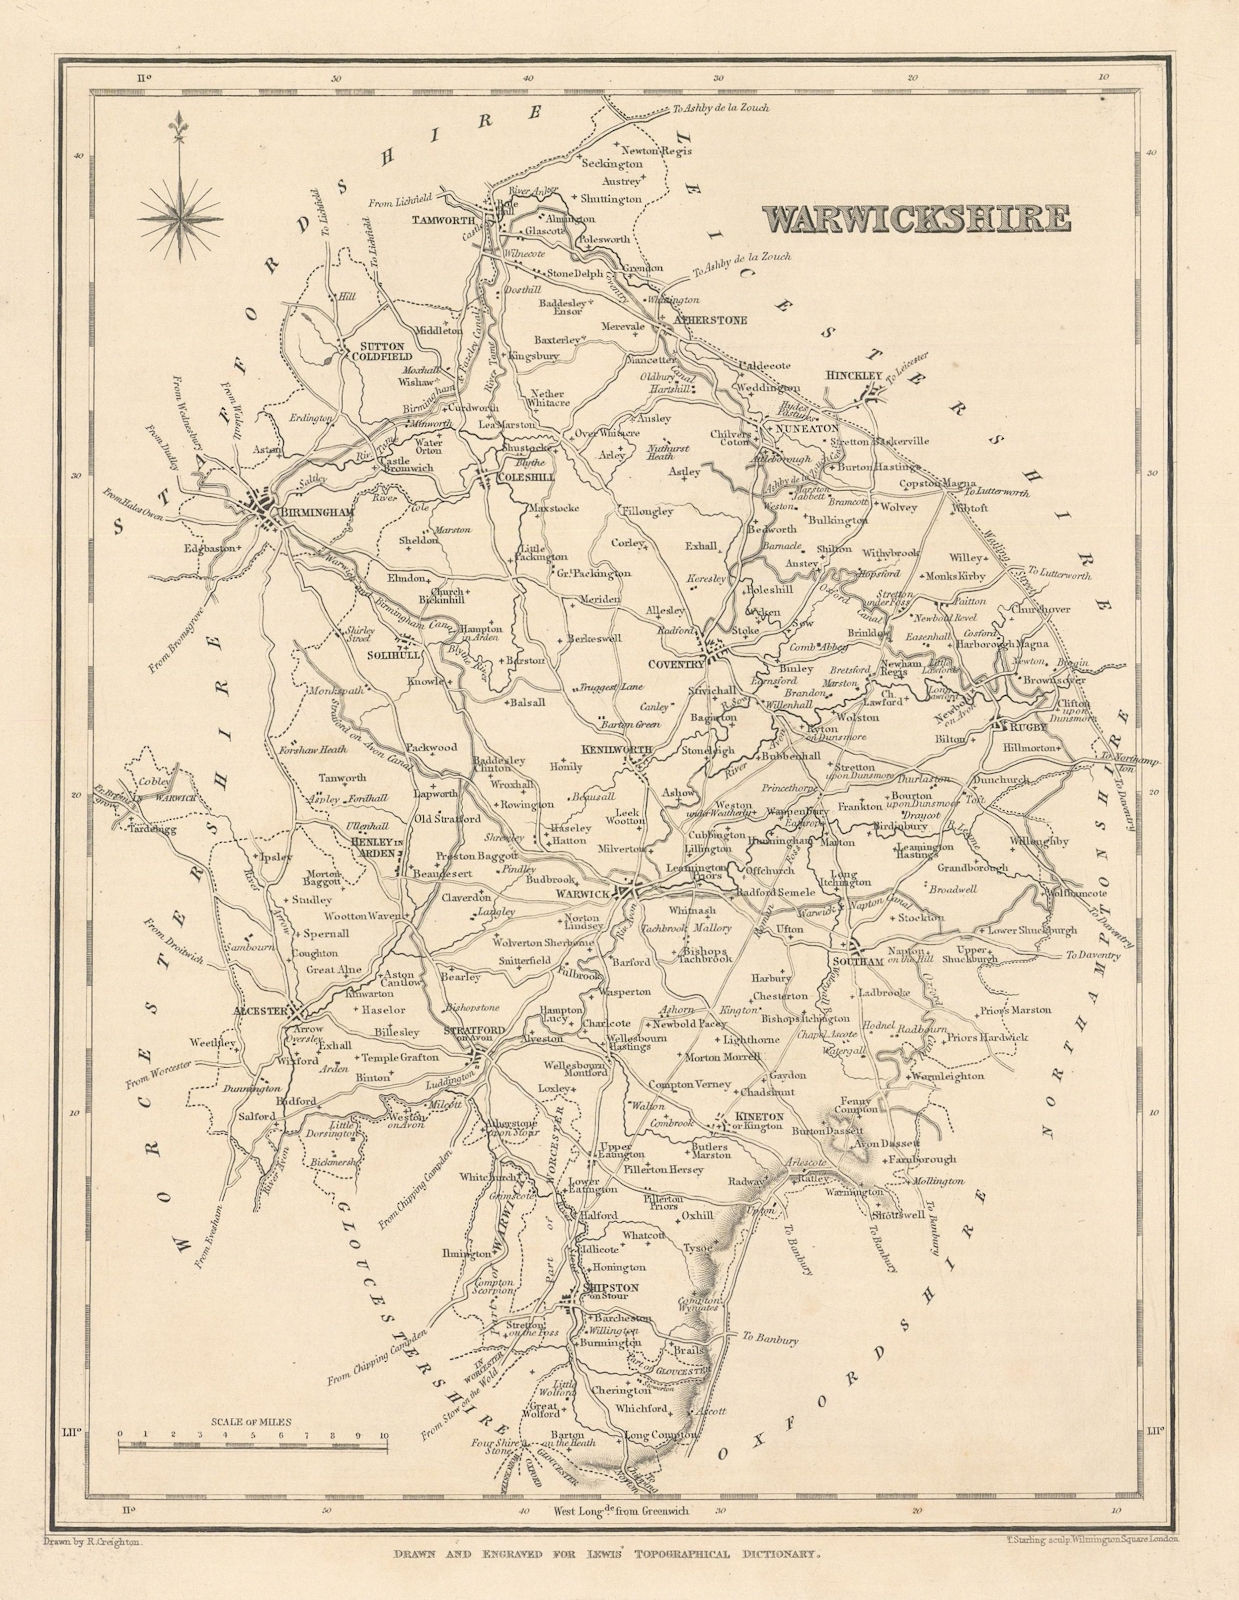 Antique county map of WARWICKSHIRE by Starling & Creighton for Lewis c1840